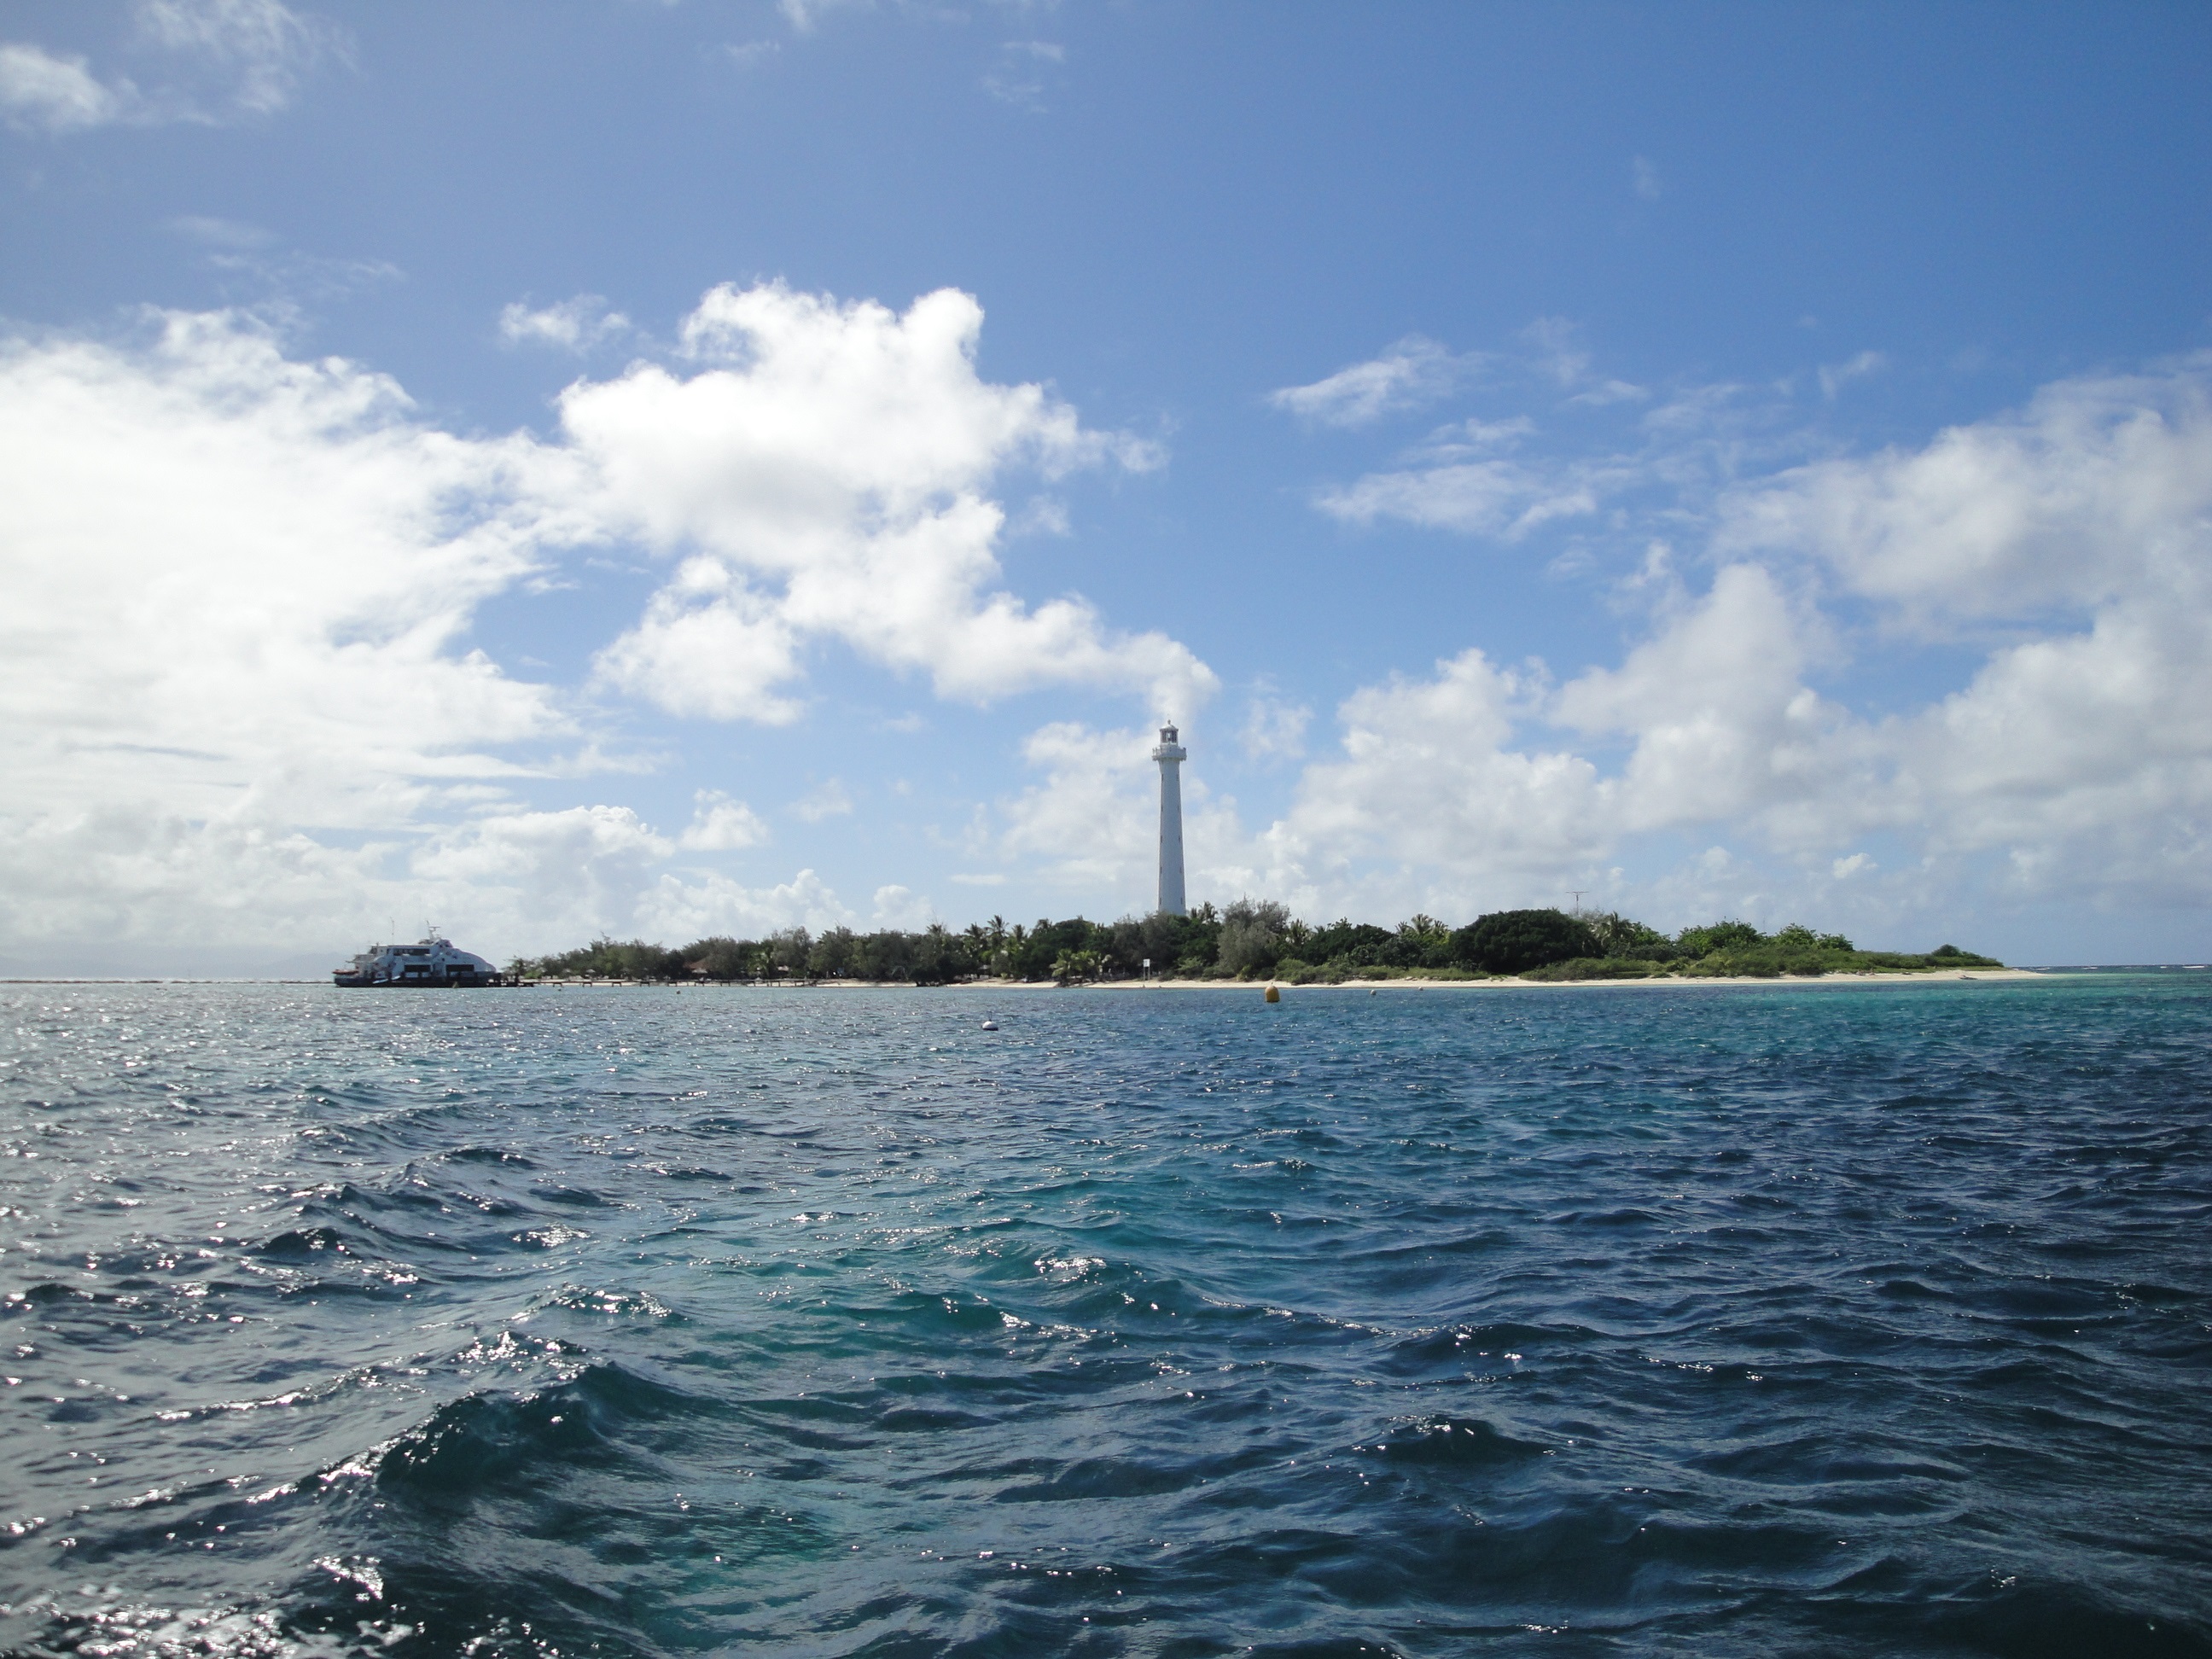 View of Amedee Island and Amedee Lighthouse